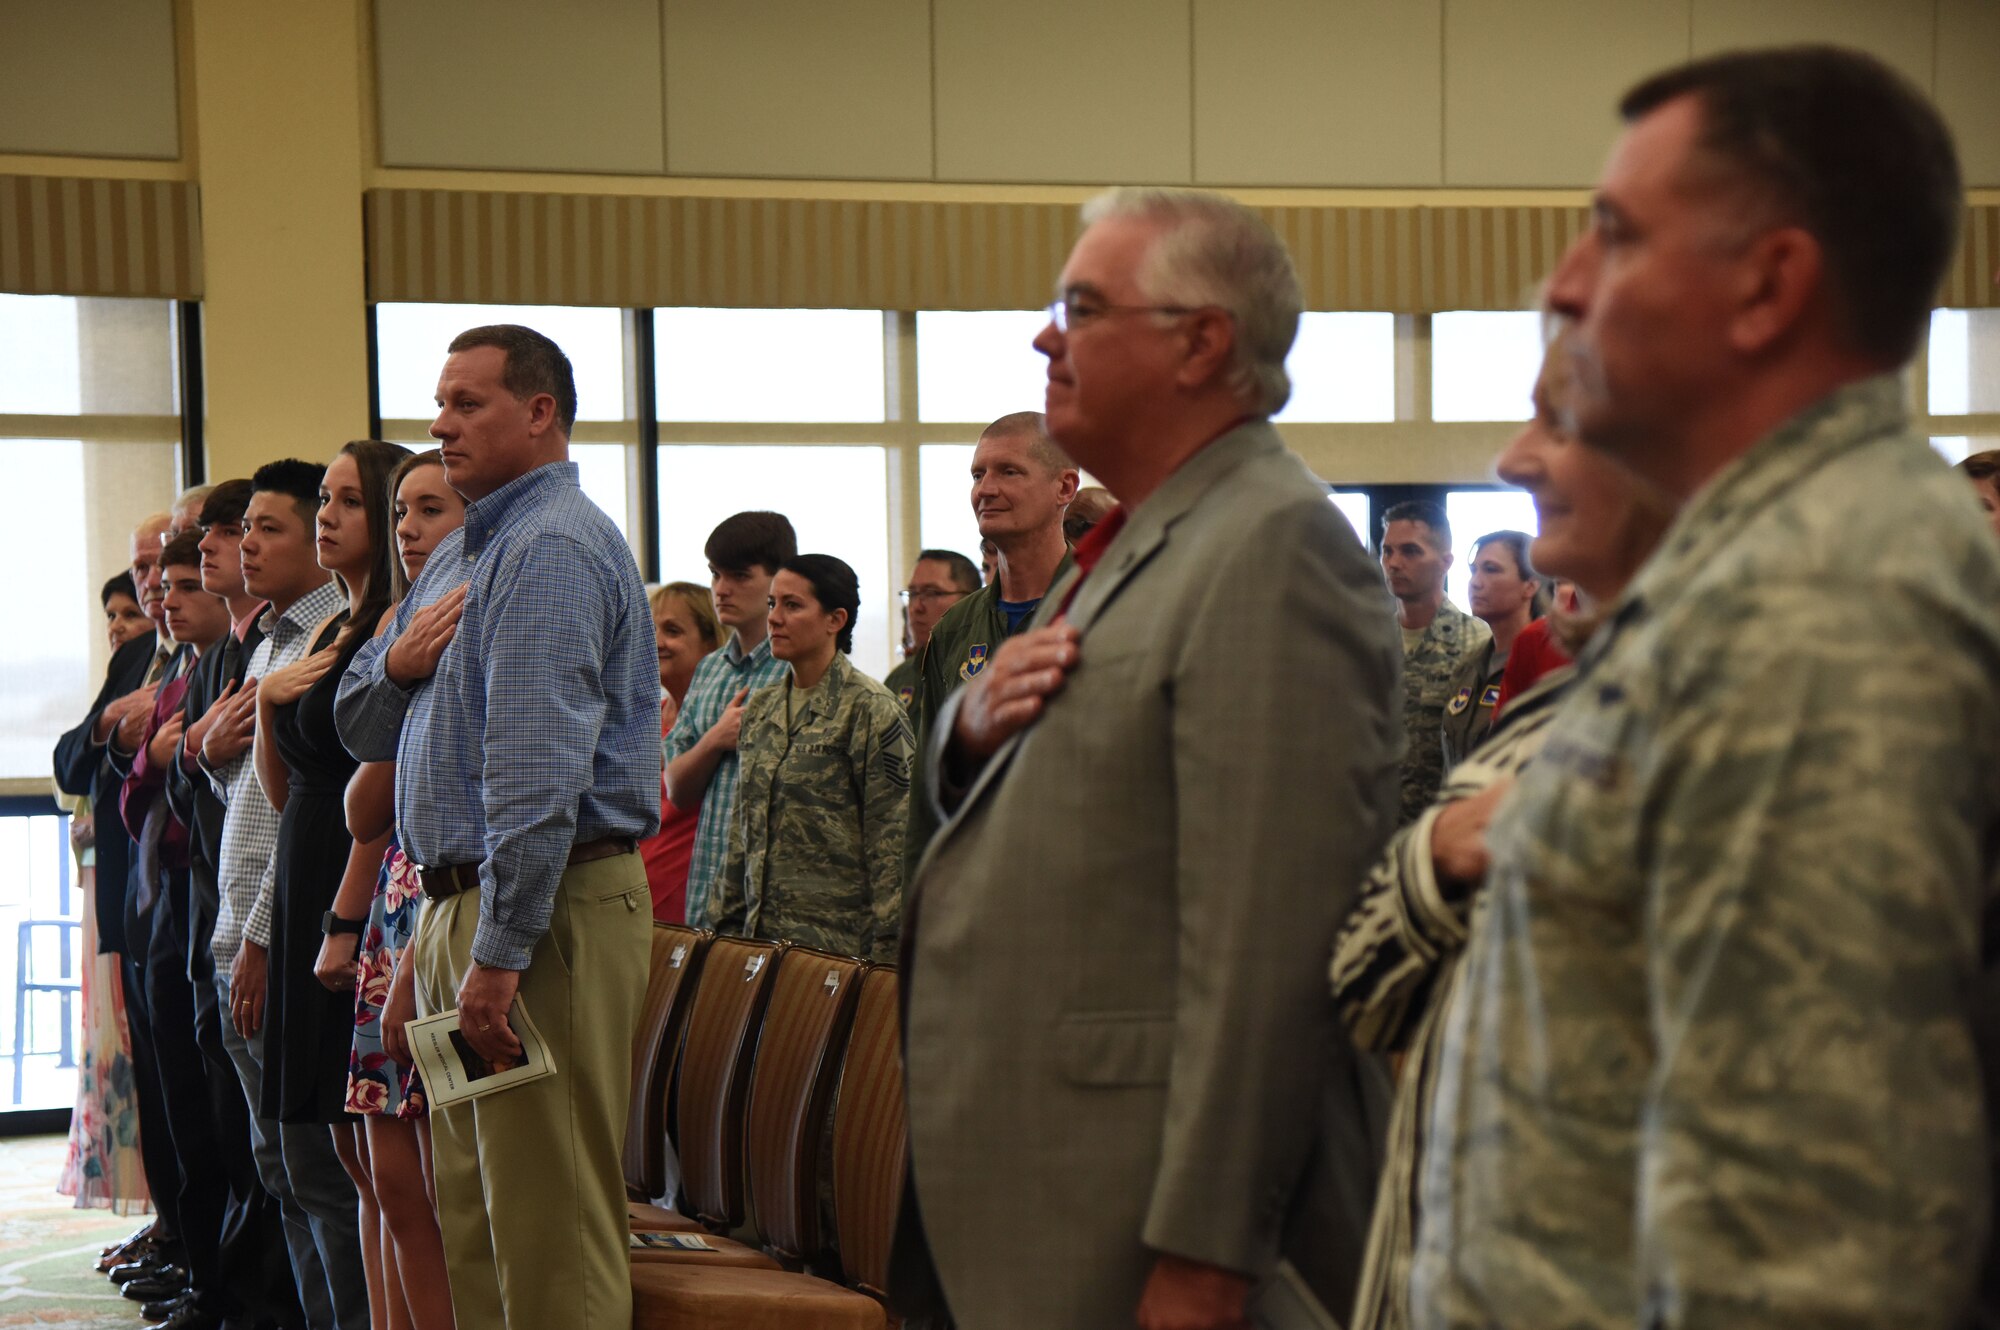 Keesler personnel, families and friends attend the 81st Medical Group change of command ceremony in the Bay Breeze Event Center at Keesler Air Force Base, Mississippi, June 22, 2018. U.S. Air Force Col. Beatrice Dolihite, incoming 81st MDG commander, assumed command from Col. Jeannine Ryder, outgoing 81st MDG commander, with the passing of the guidon. (U.S. Air Force photo by Kemberly Groue)